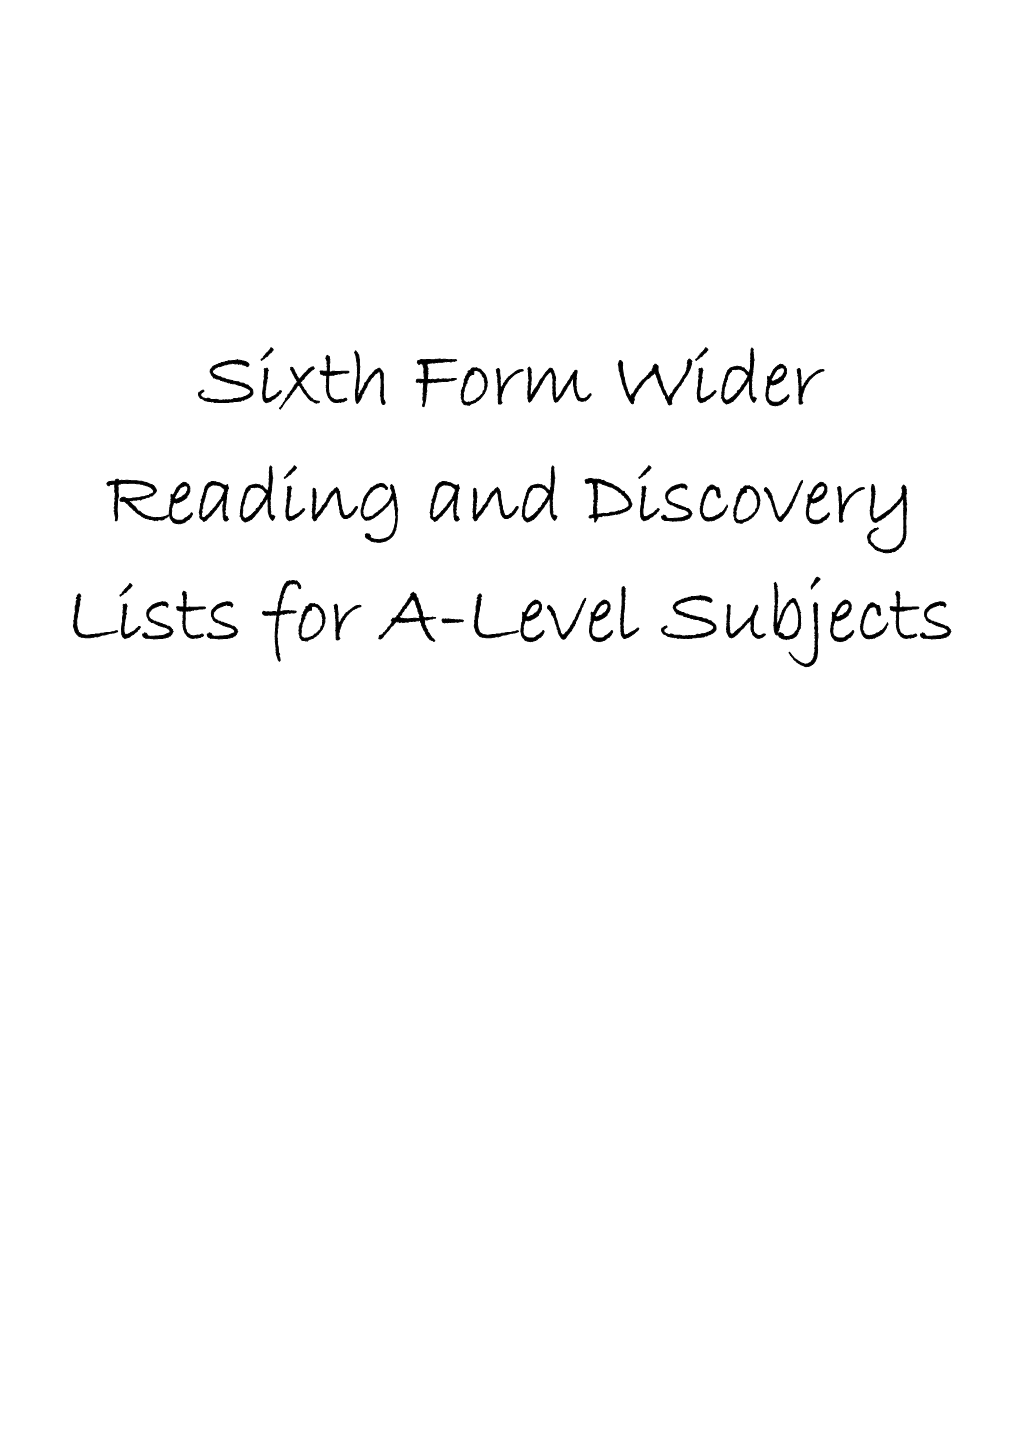 Sixth Form Wider Reading and Discovery Lists for A-Level Subjects